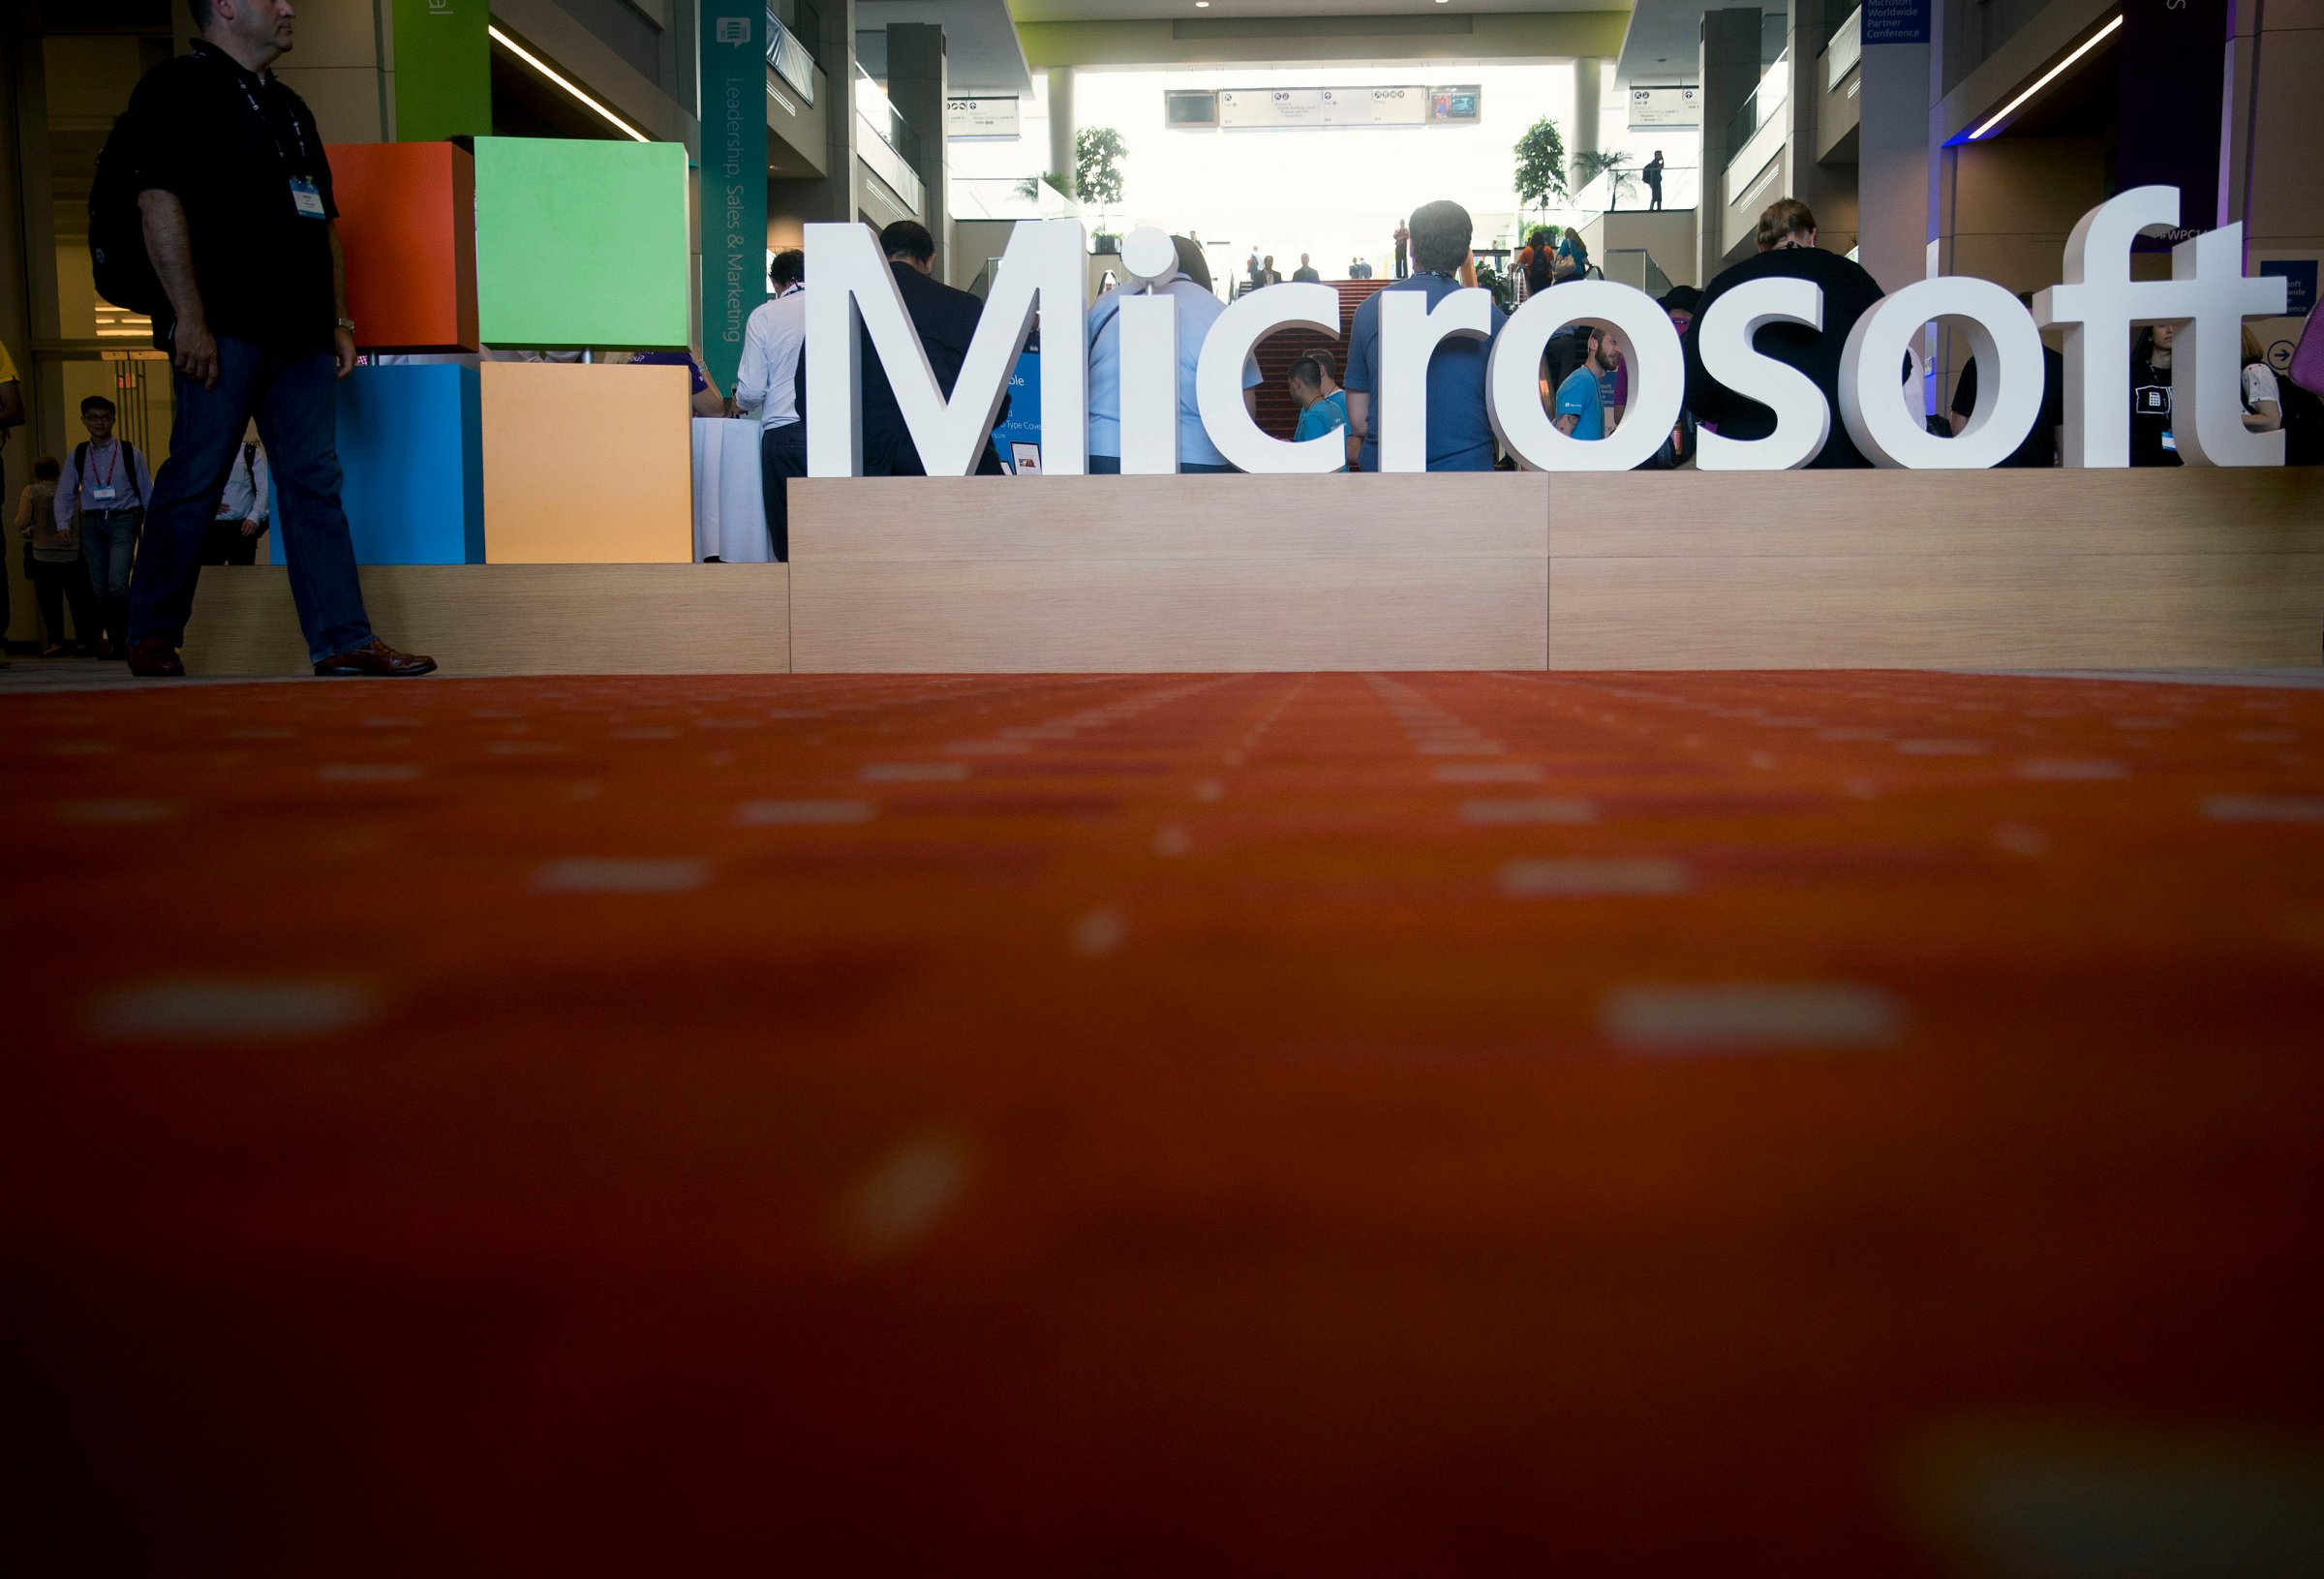 The Microsoft Corp. logo sits on display during the Microsoft Worldwide Partner Conference in Washington, D.C. on July 16, 2014.